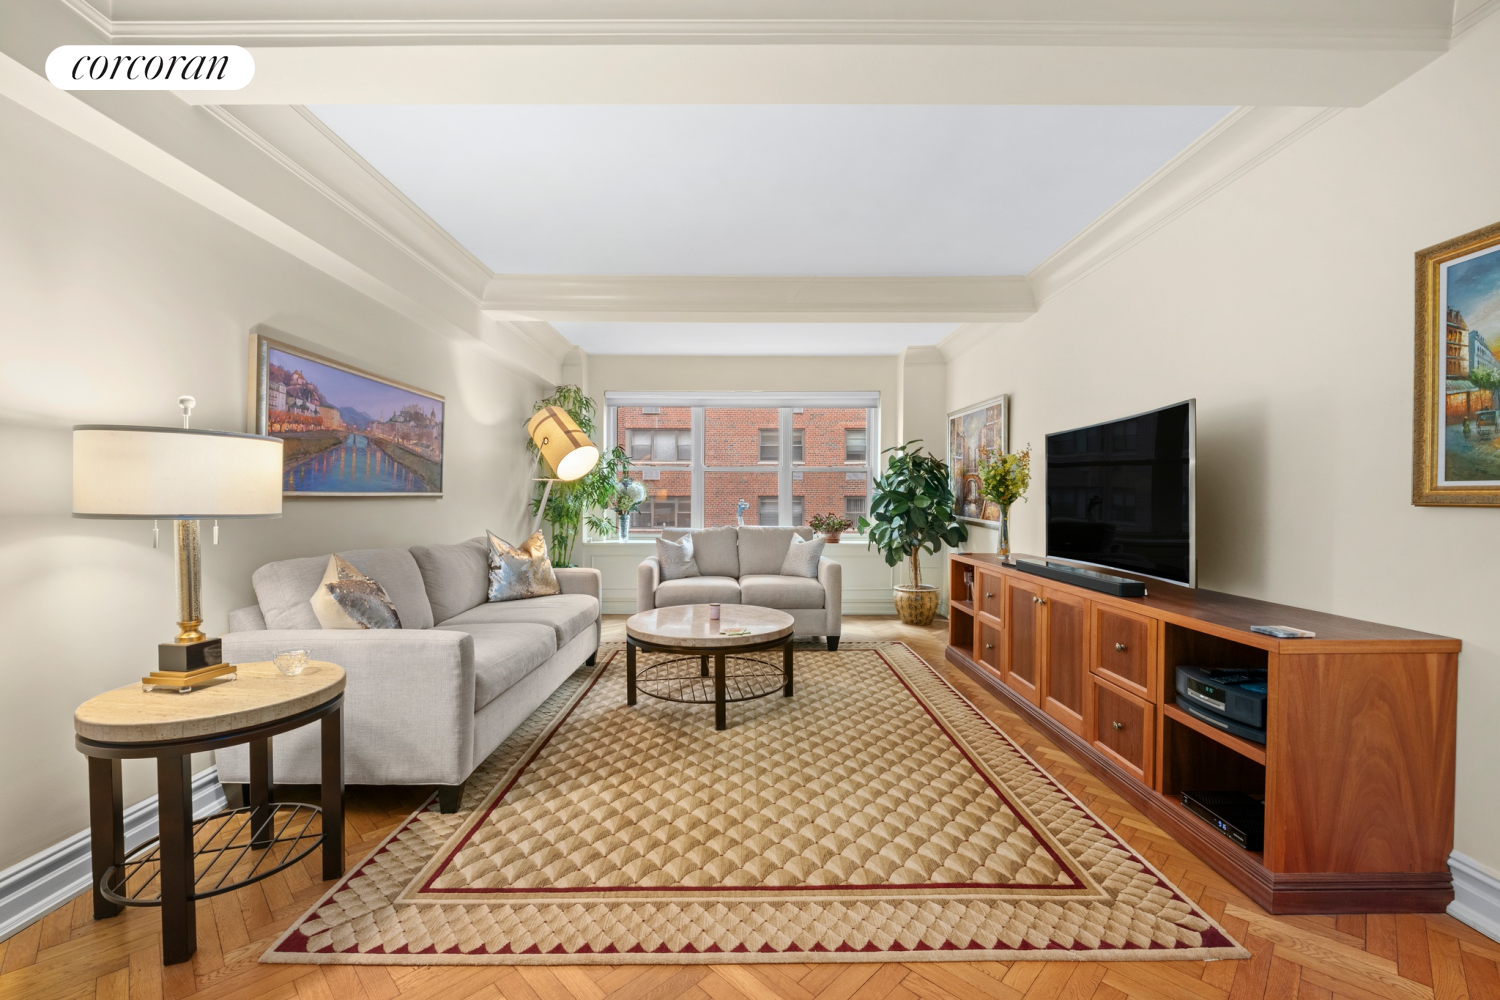 177 East 77th Street 7A, Lenox Hill, Upper East Side, NYC - 2 Bedrooms  
2 Bathrooms  
6 Rooms - 